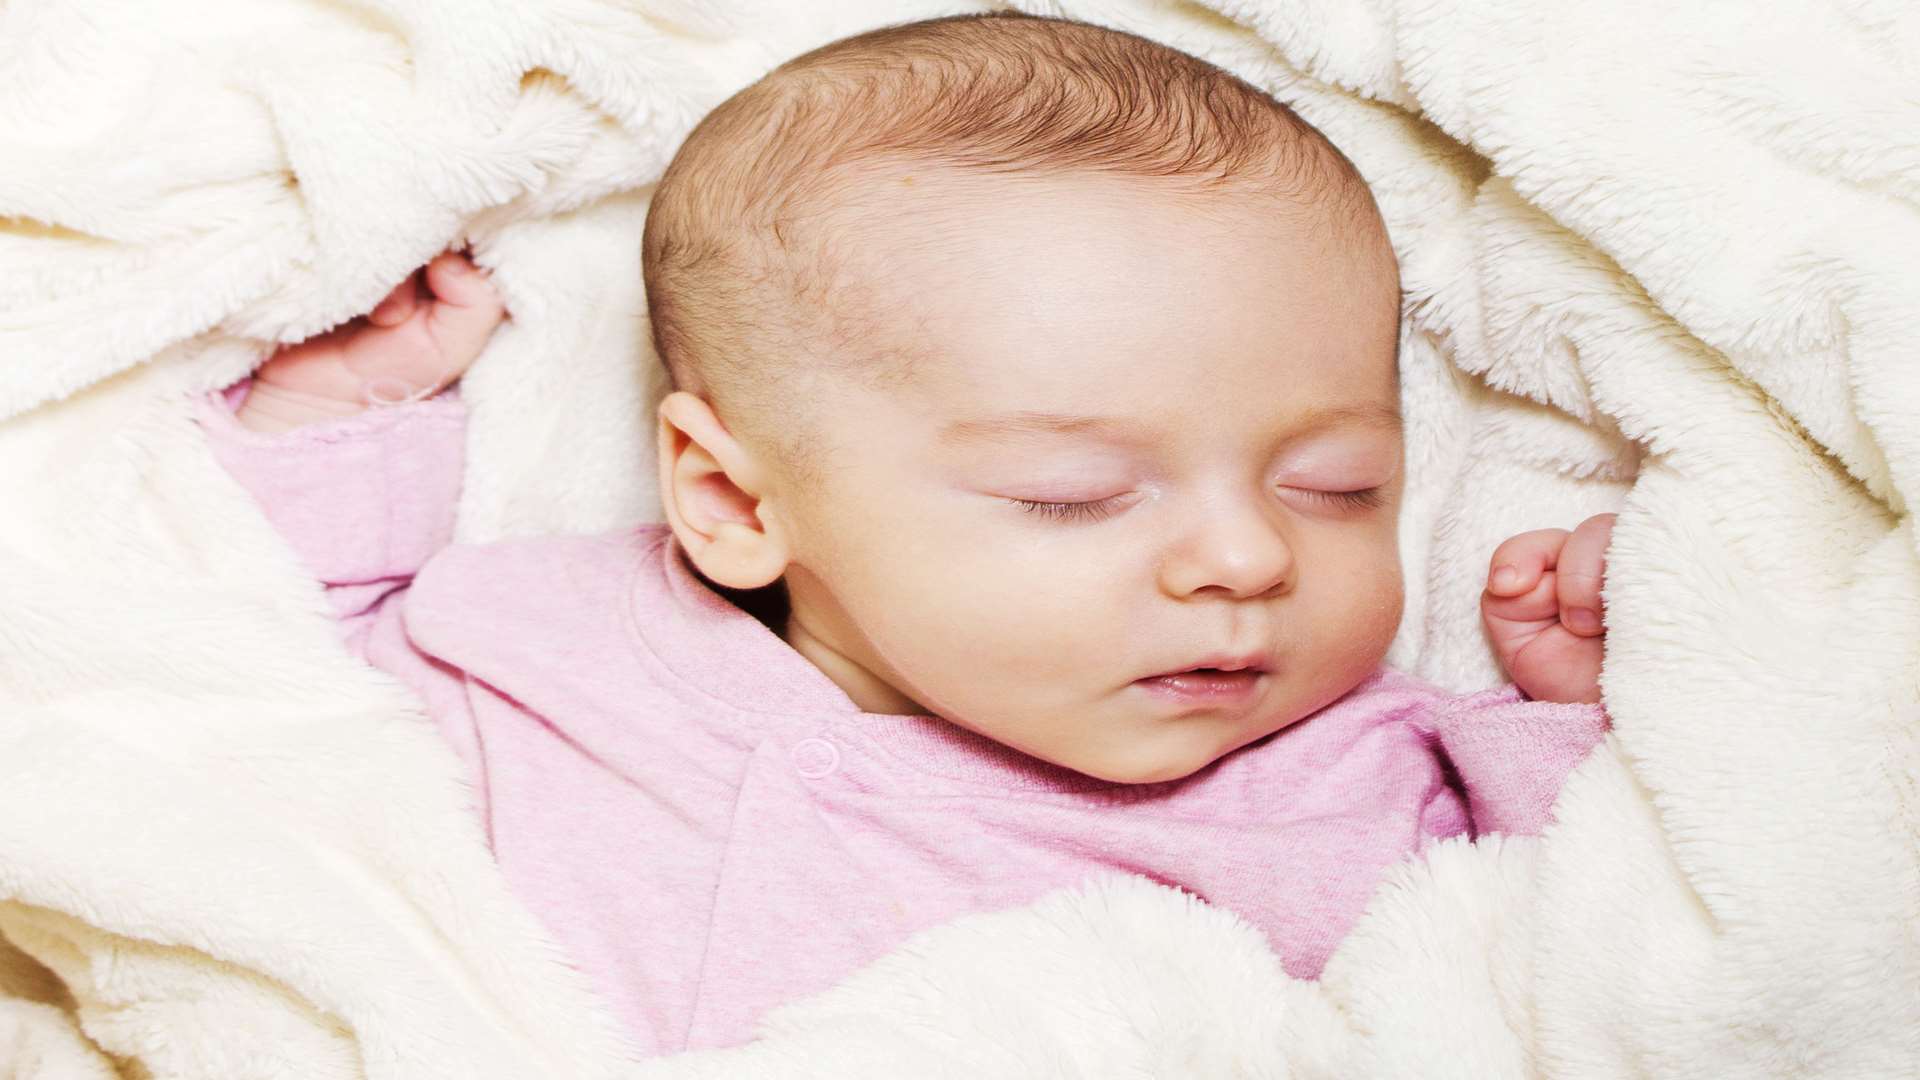 Sleep is crucial to a baby's development